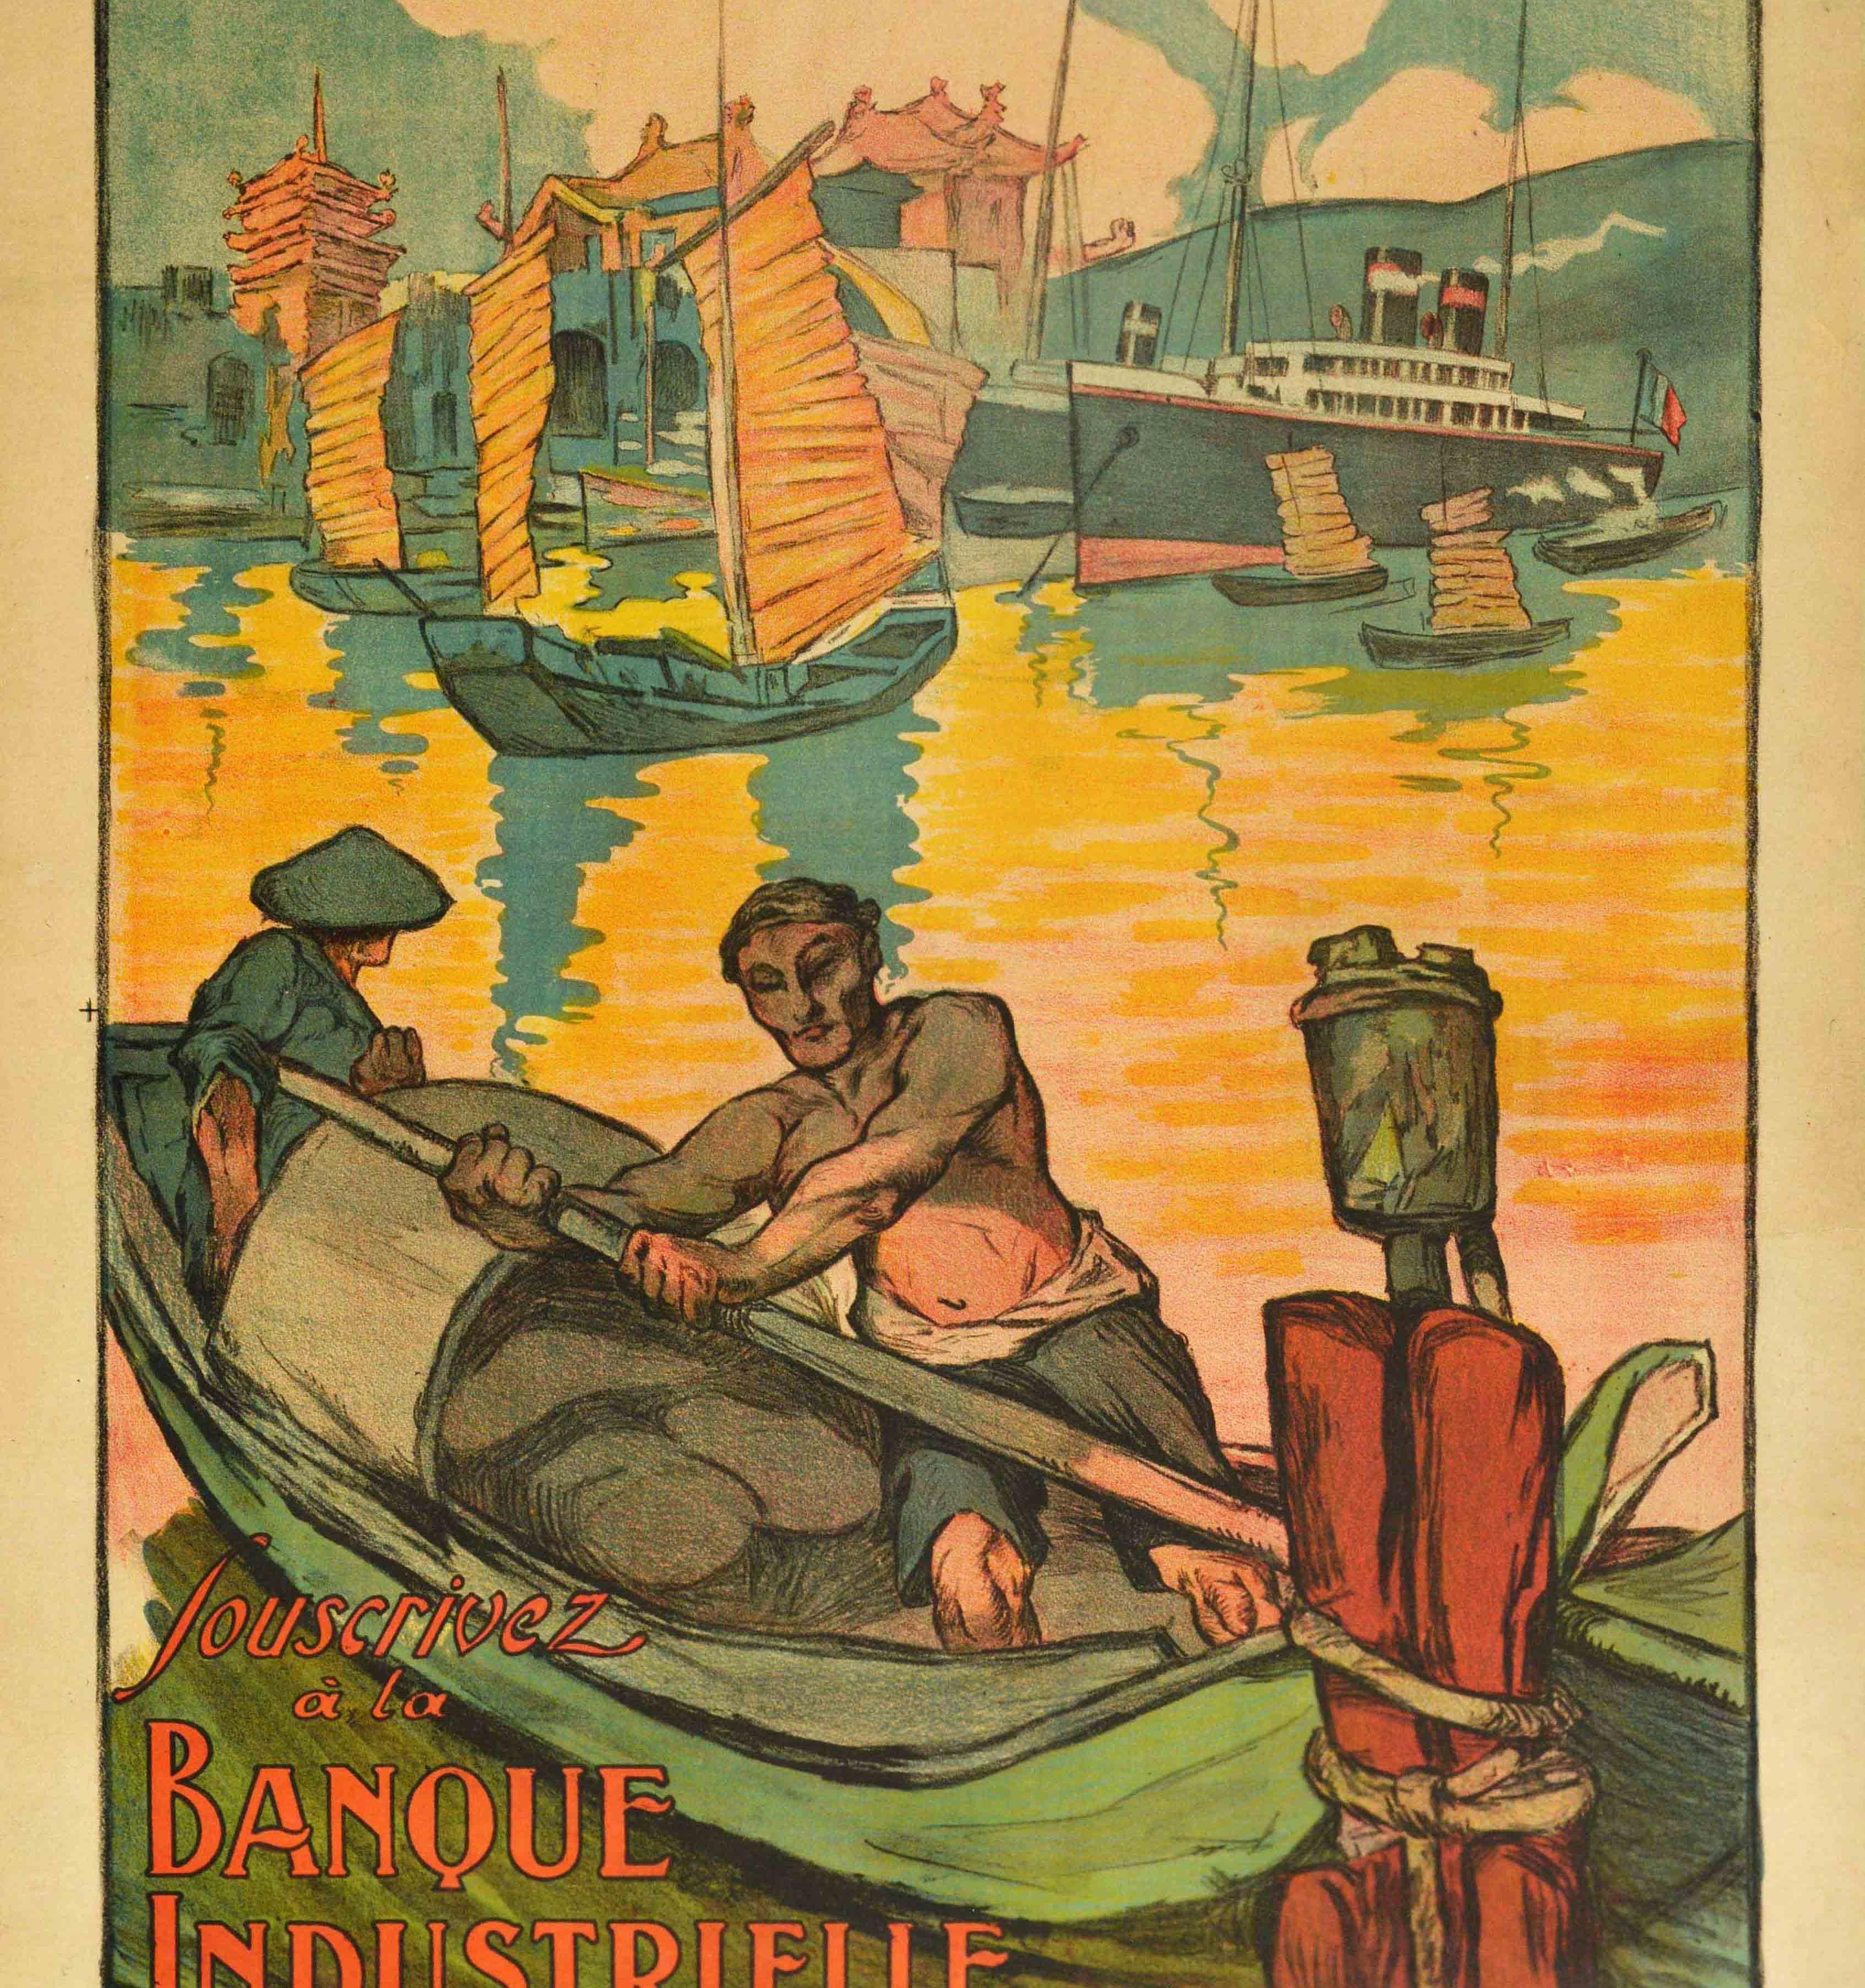 Original antique poster in French - Emprunt de la Paix Souscrivez a la Banque Industrielle de Chine / Peace Loan Subscribe to the Industrial Bank of China (based in Shanghai and Paris; 1913-1922) - featuring a great artwork showing an evening scene